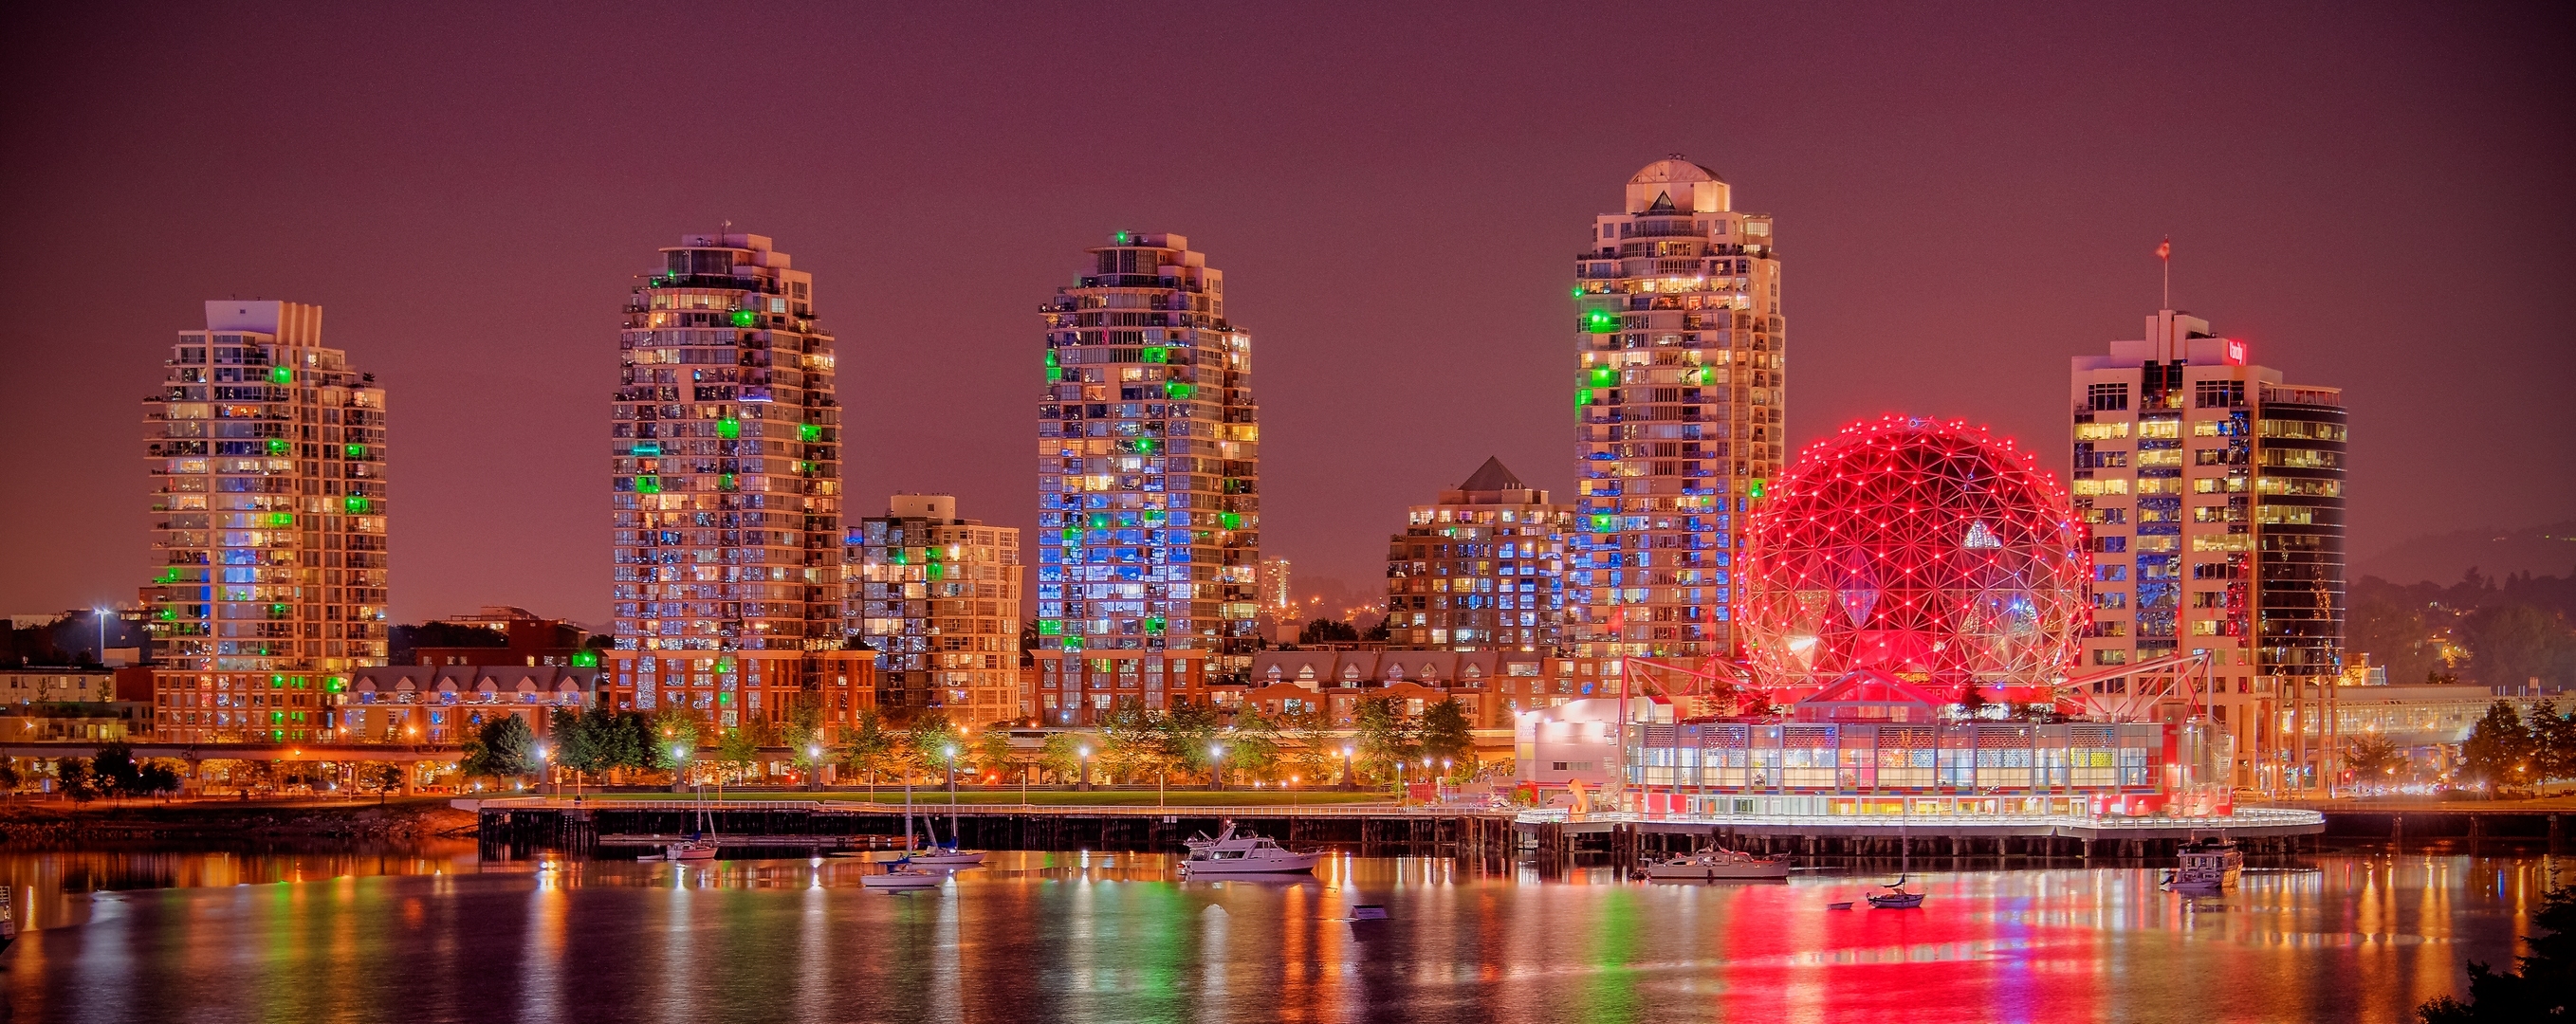 canada, vancouver, man made, city, cityscape, light, night, cities cellphone